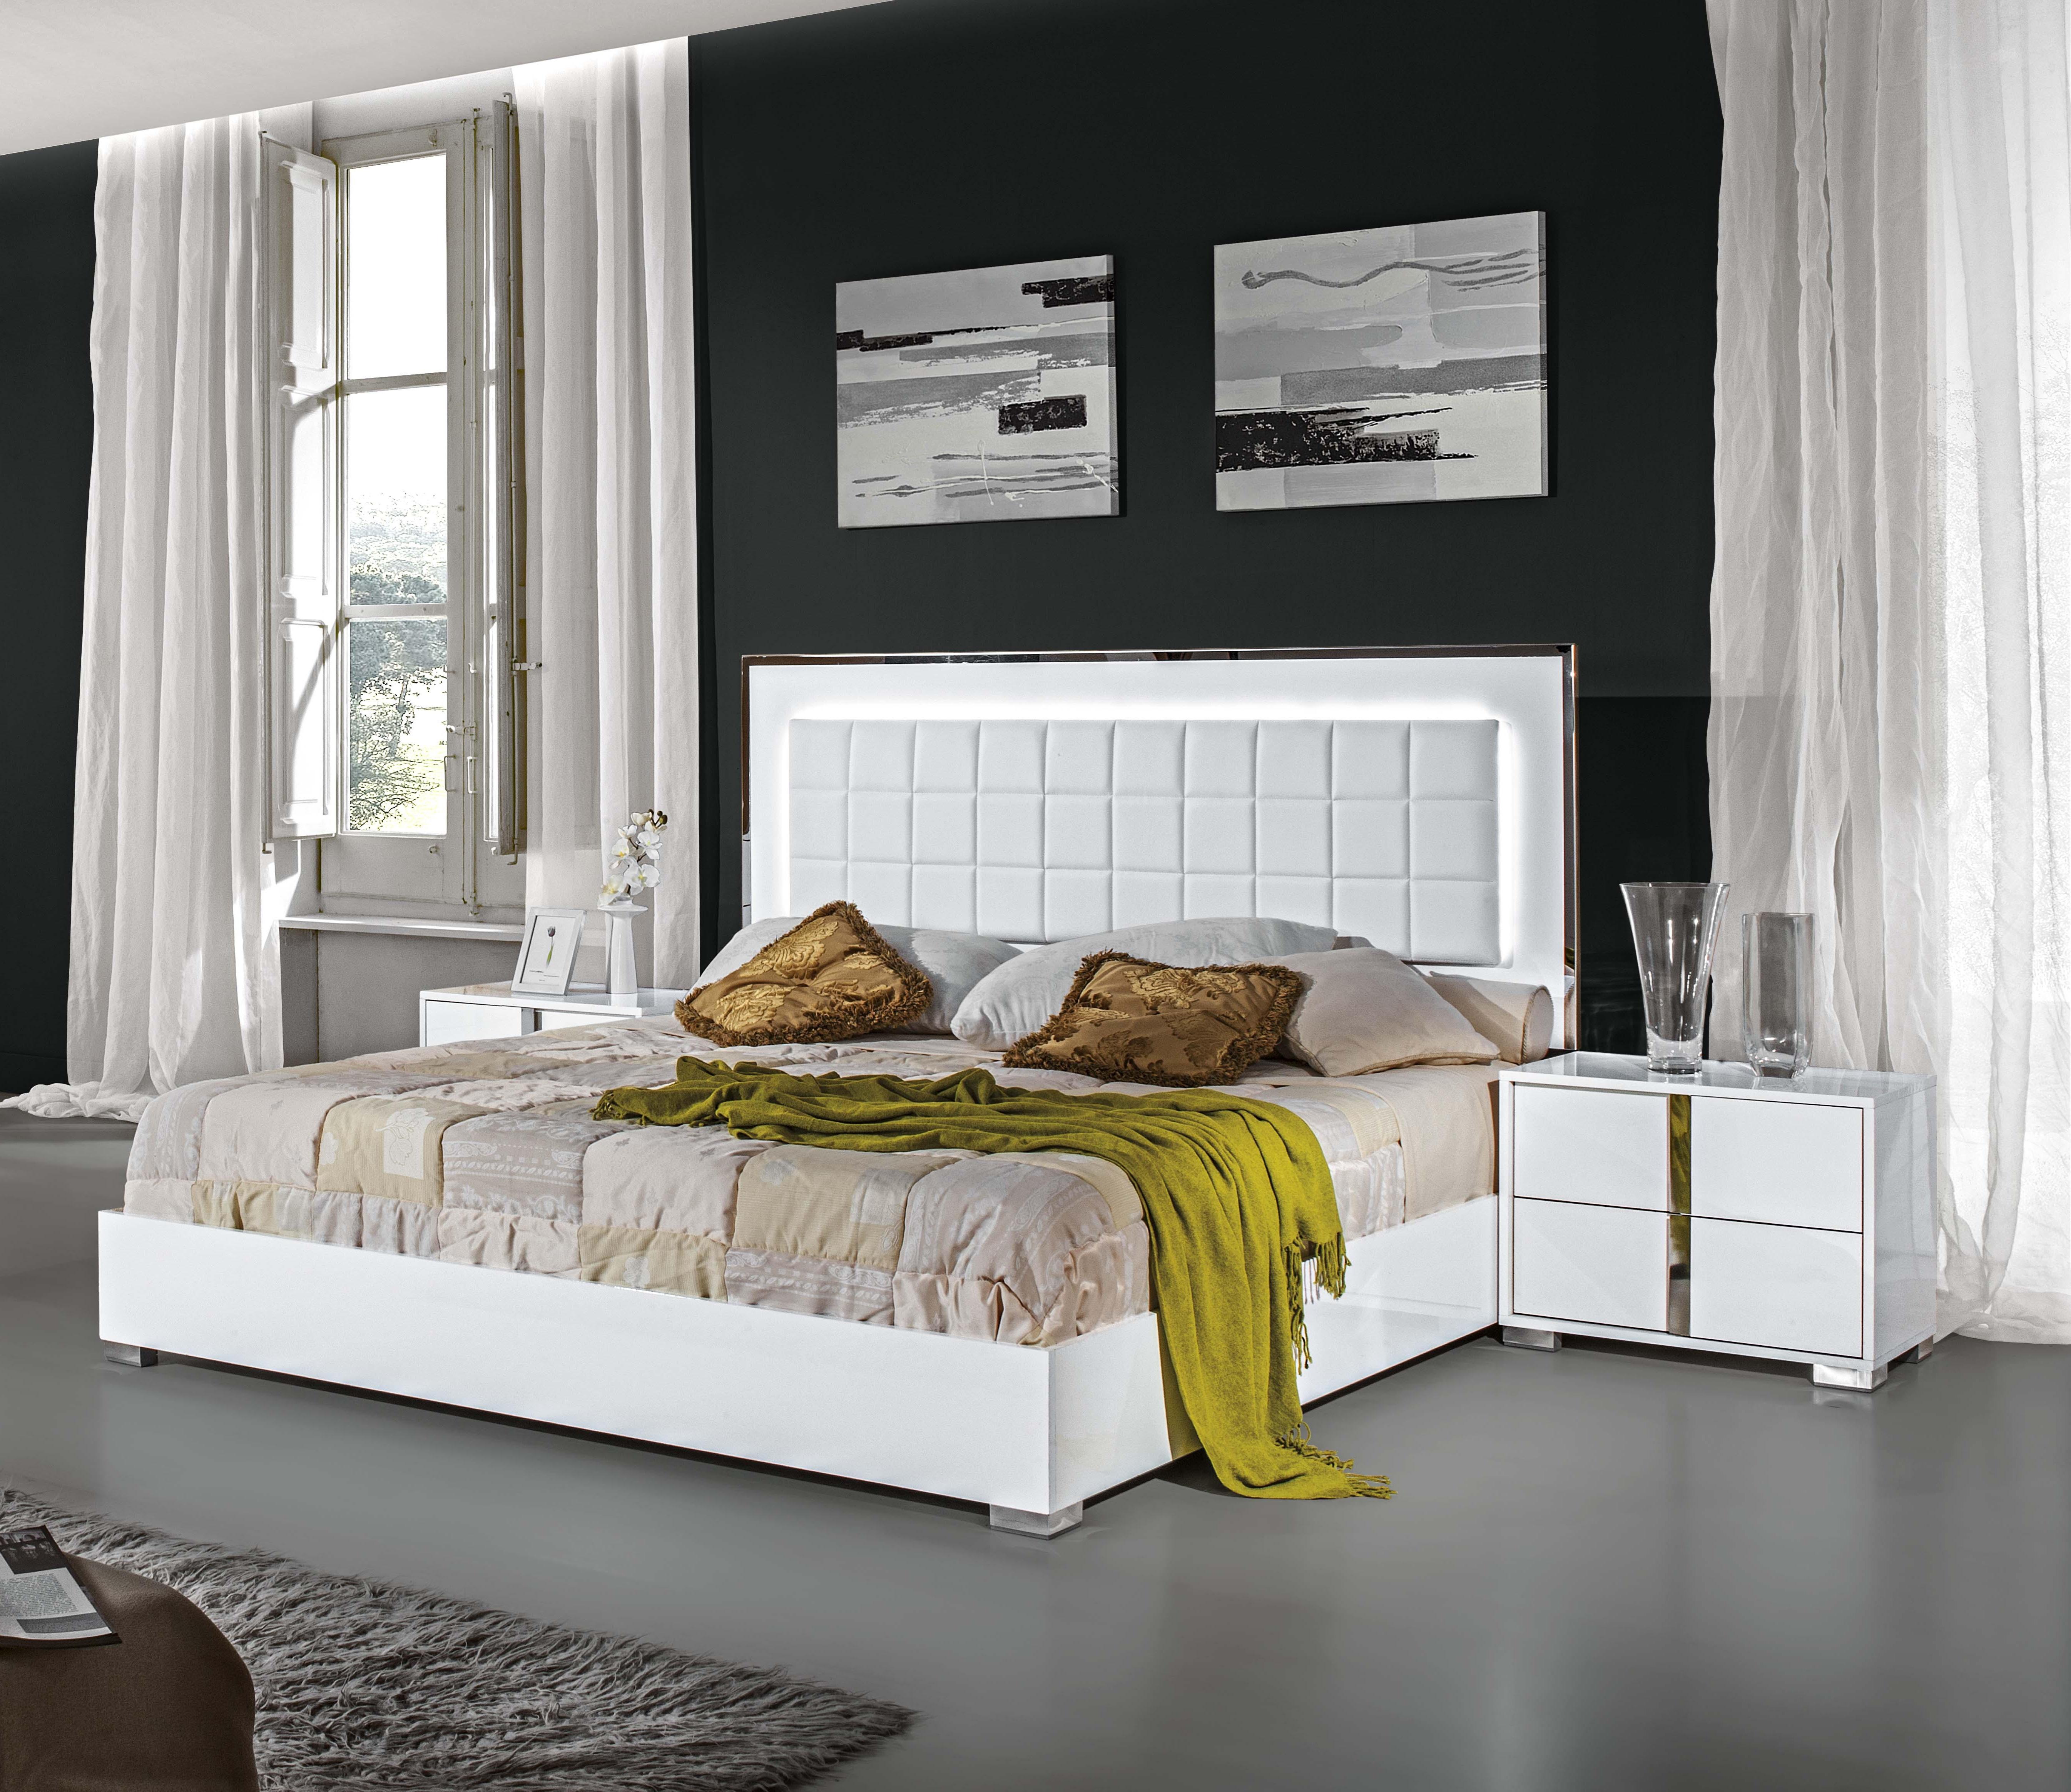 

    
Contemporary King Size Bedroom Set 3Pcs in White High Gloss MADE IN ITALY J&M Alice
